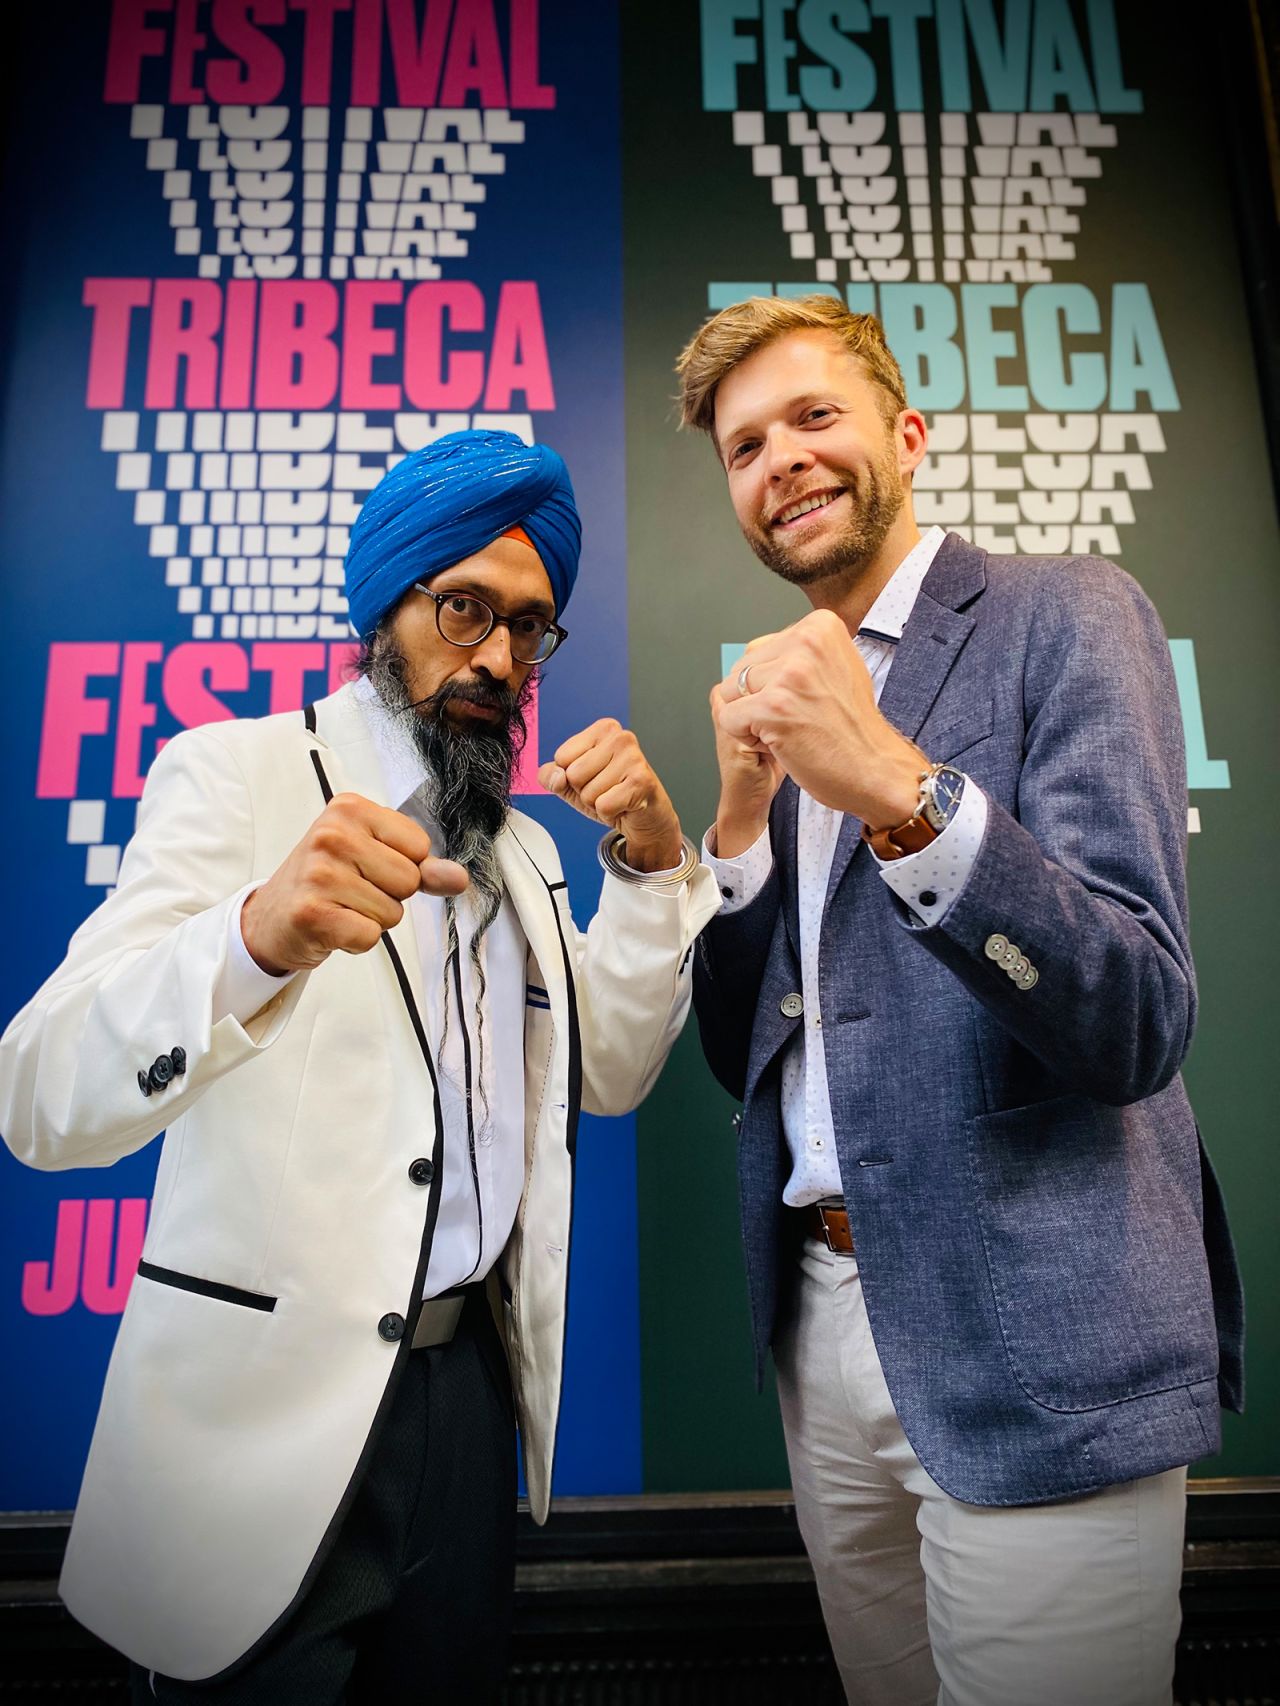 Singh and Westra, co-directors of the animated short film 